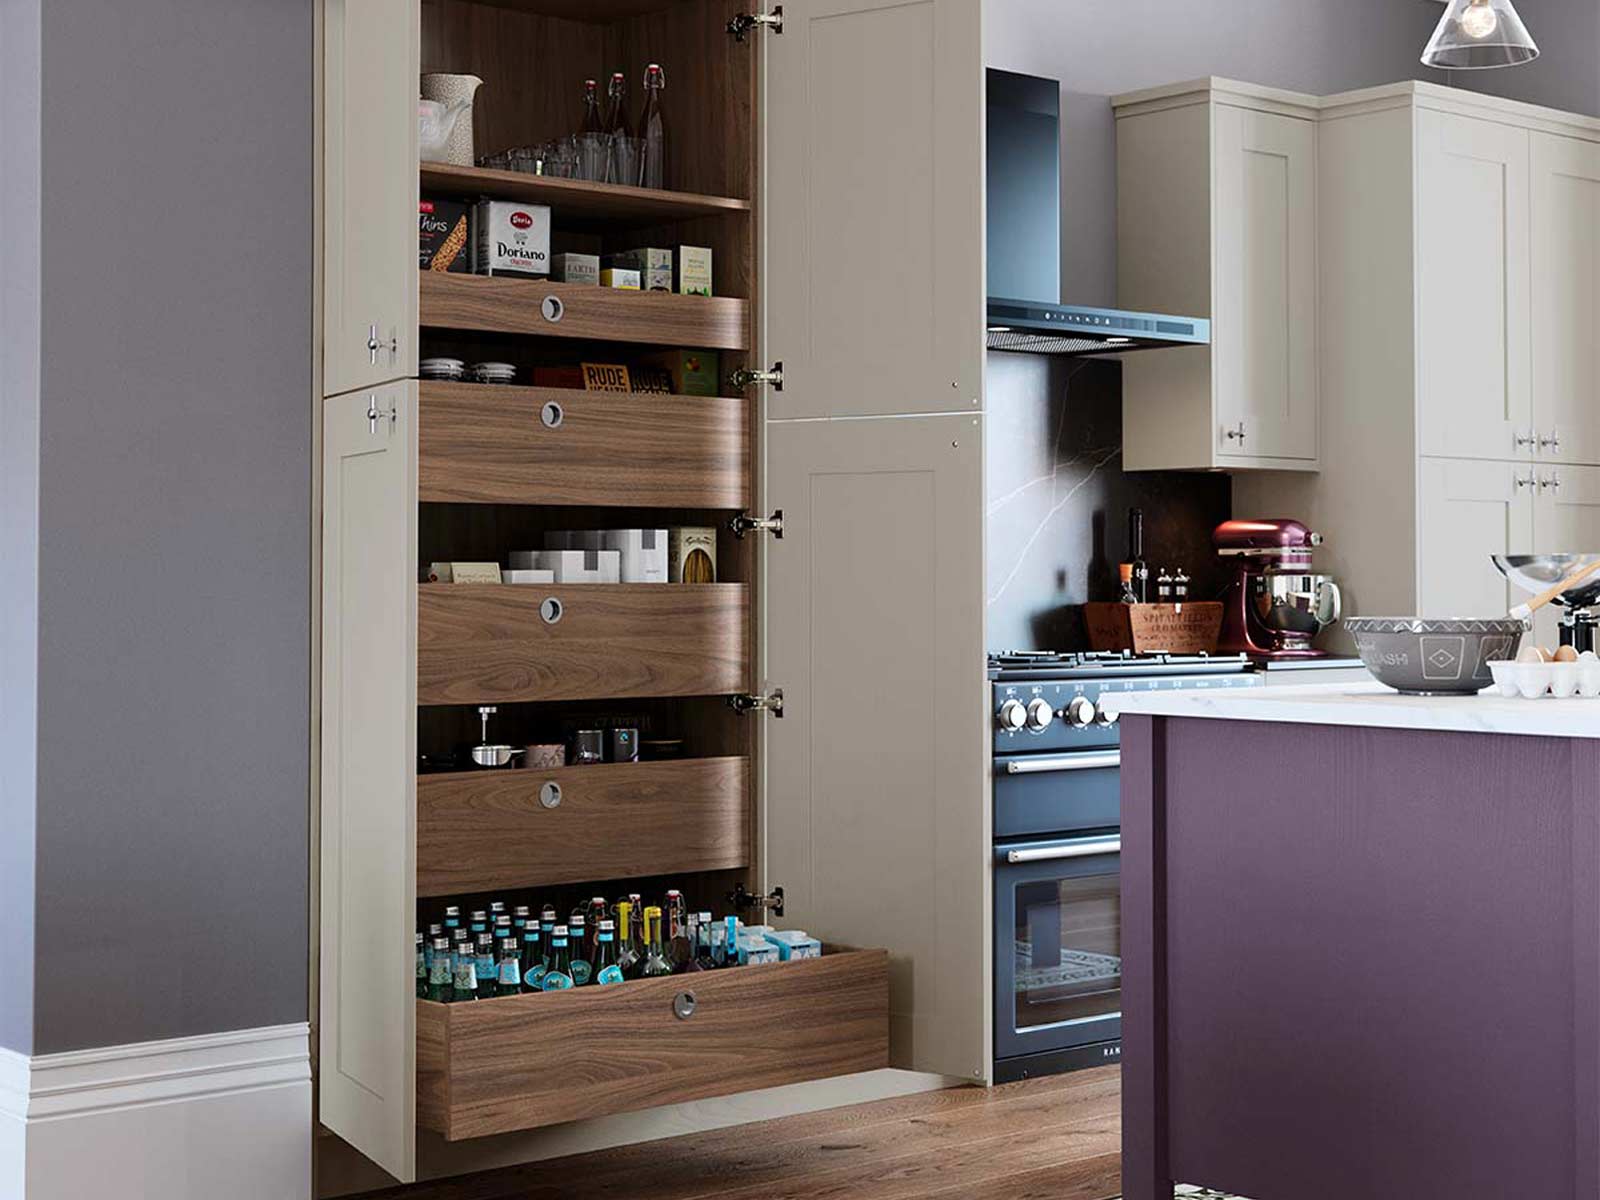 The larder kitchen unit storage pull-out option with internal drawers